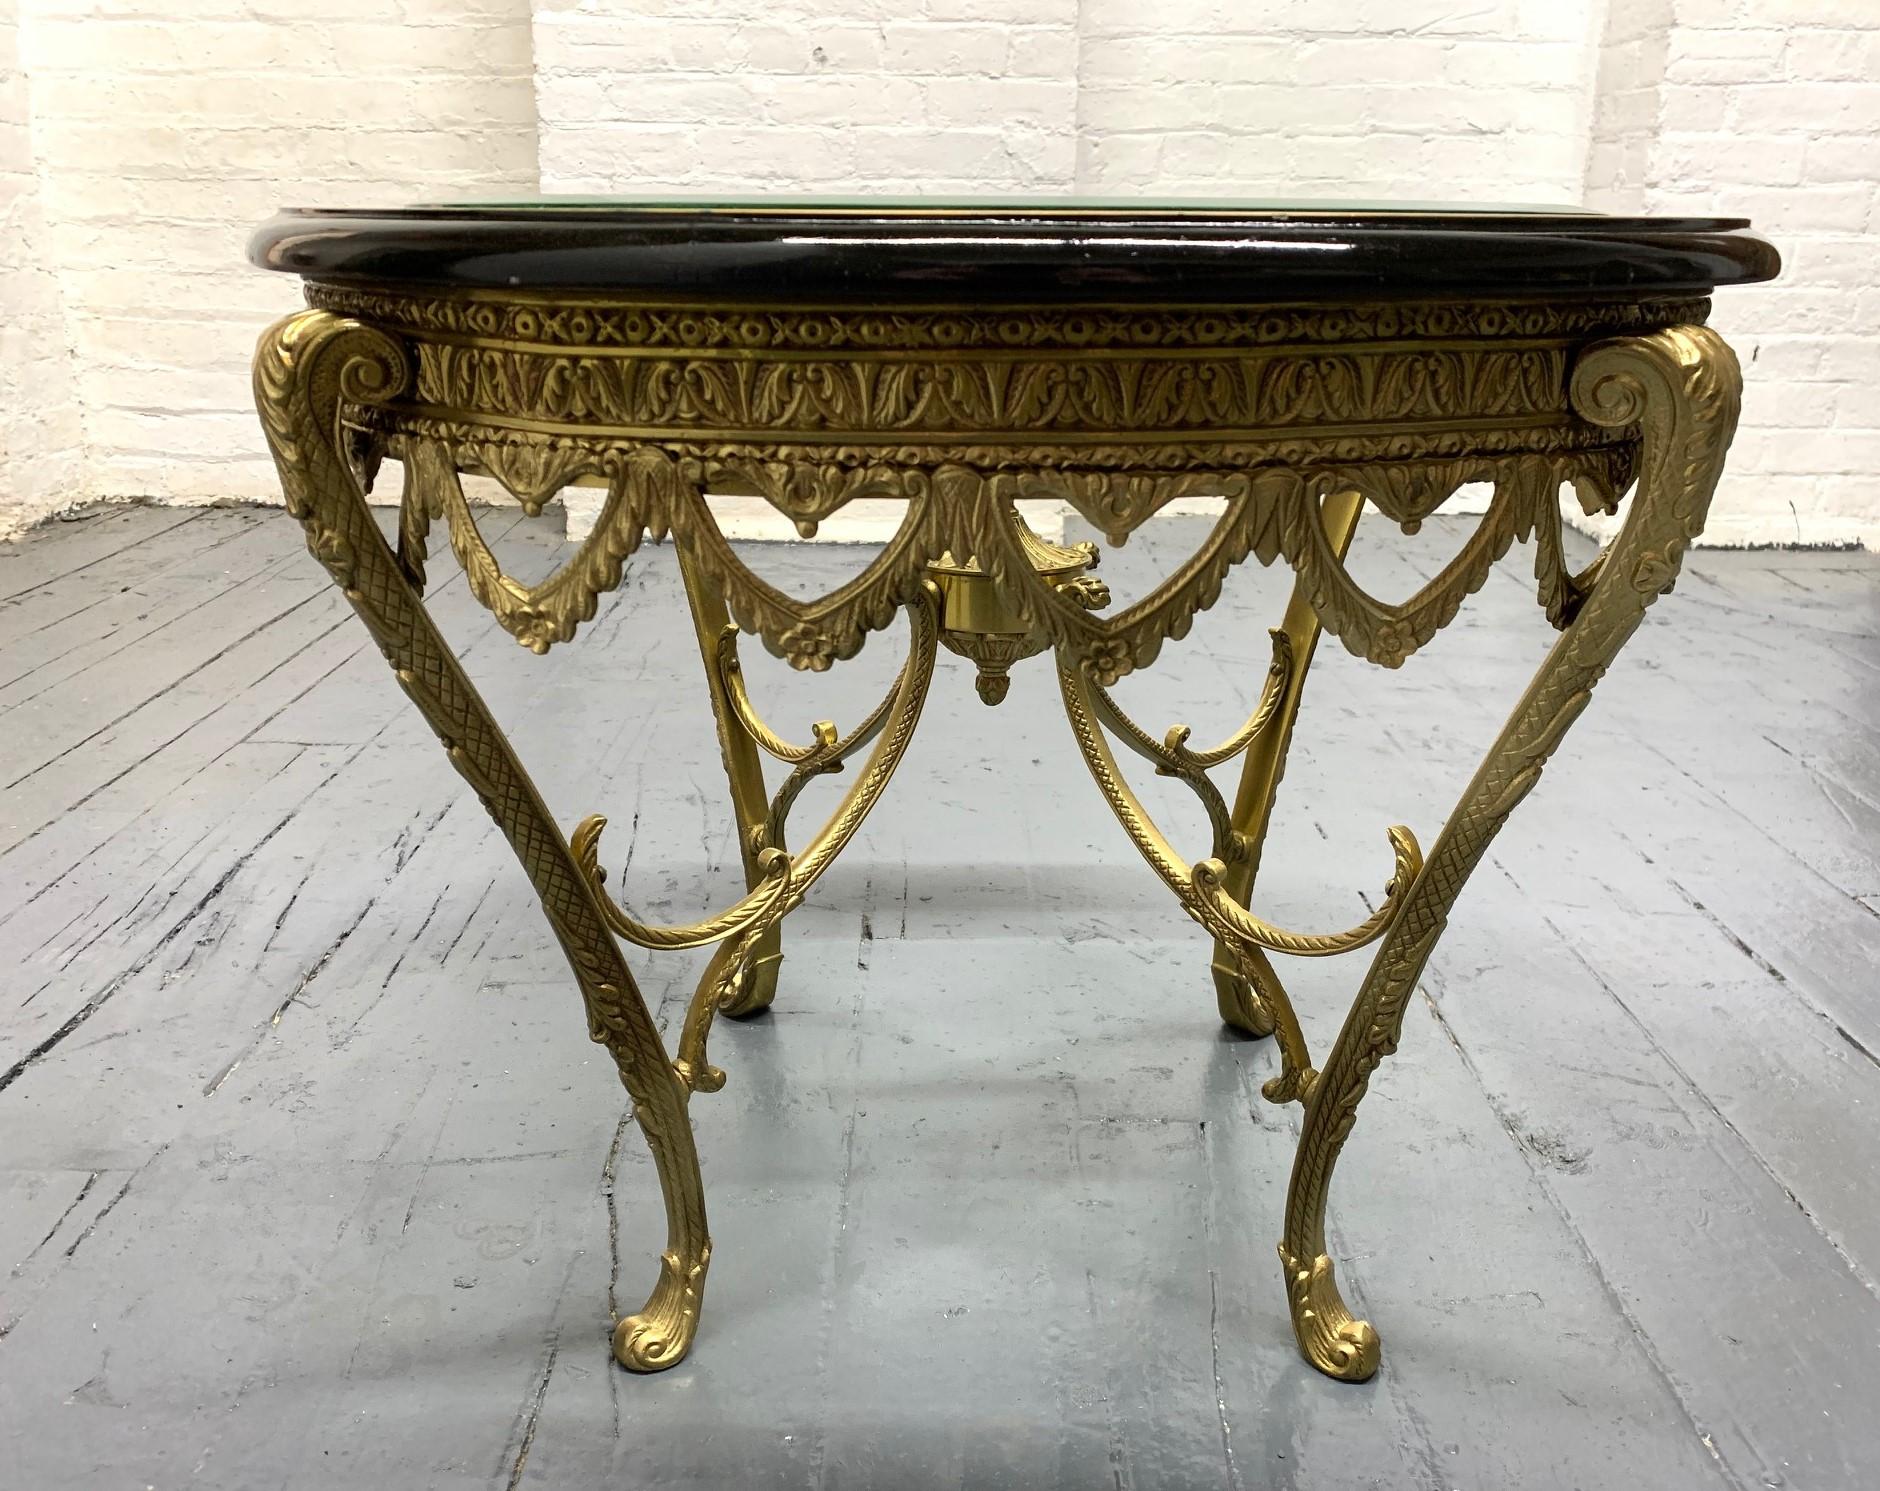 Italian gilt bronze table with an ebonized top and mother of pearl inlay. Beveled glass.